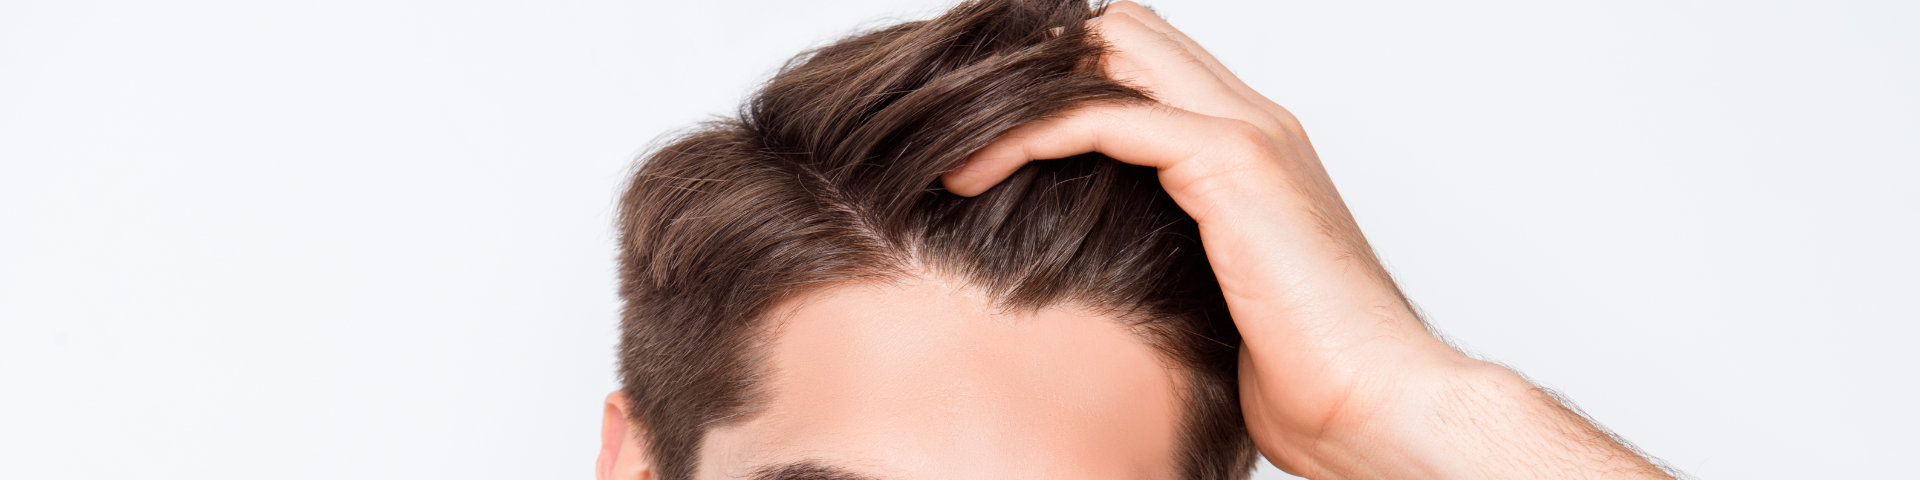 Tips to Prevent Hair Loss from Holiday Stress Pasadena, CA